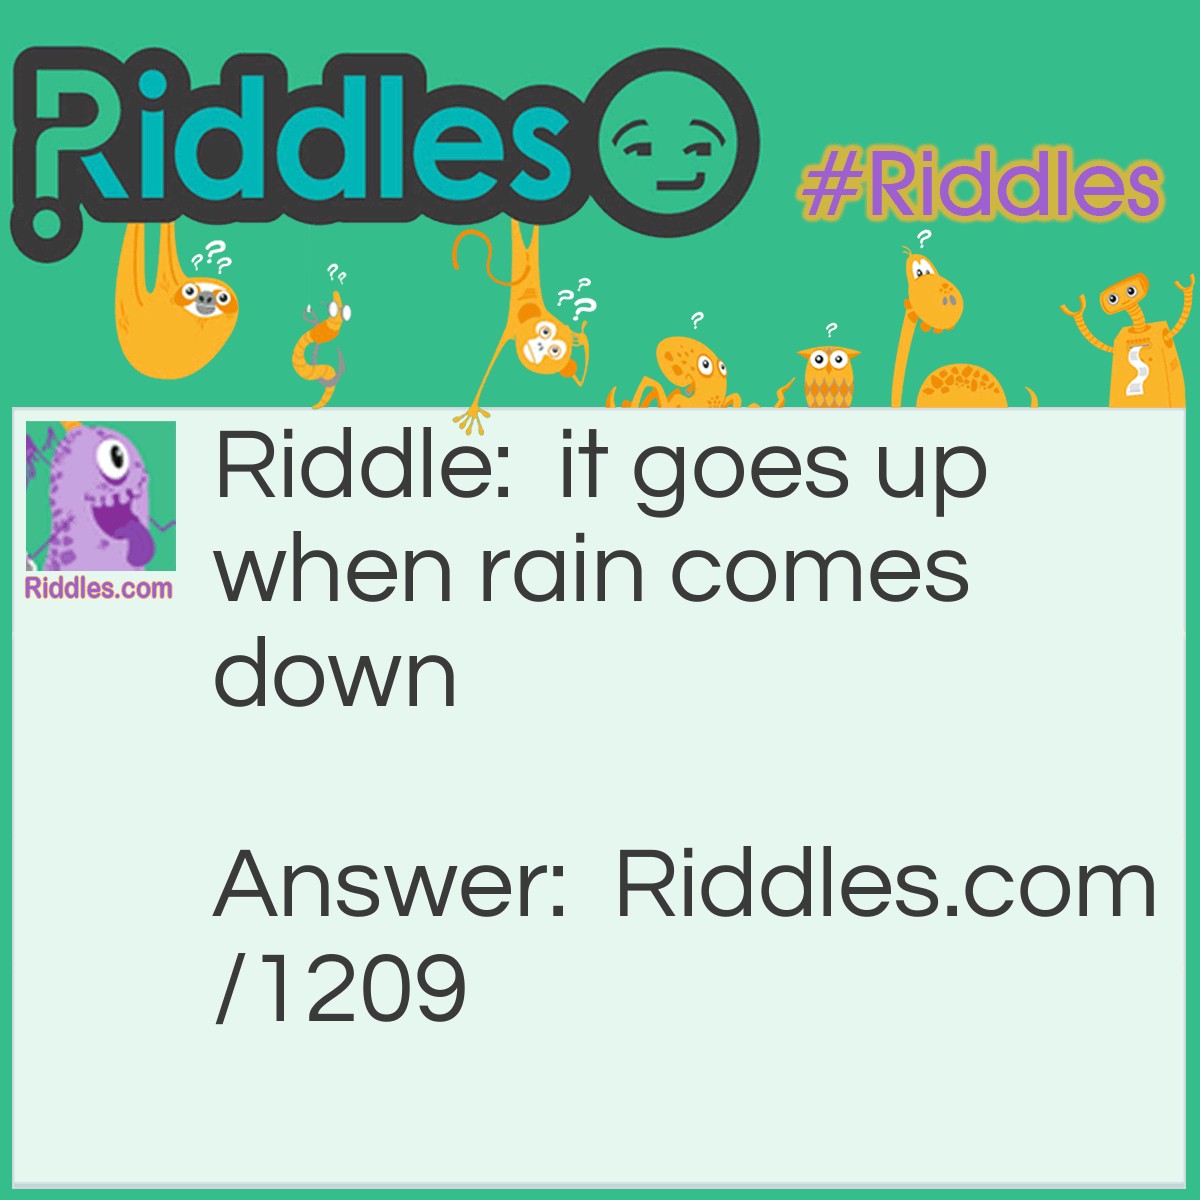 Riddle: It goes up when rain comes down. What is it? Answer: An umbrella.